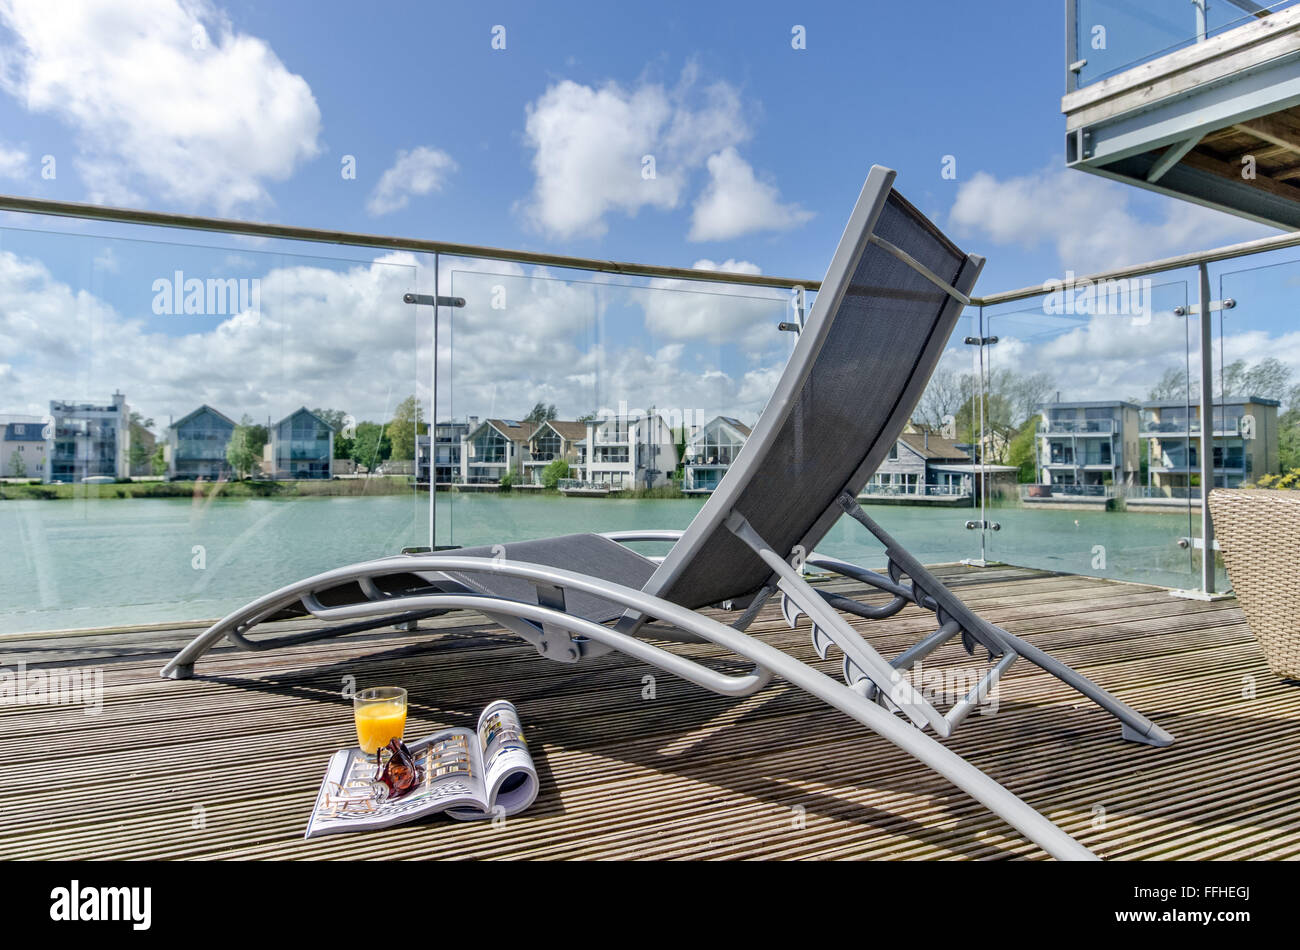 A sun lounger on a decking, waterside veranda overlooking a lake & waterfront homes, South Cerney, Cotswolds, UK Stock Photo